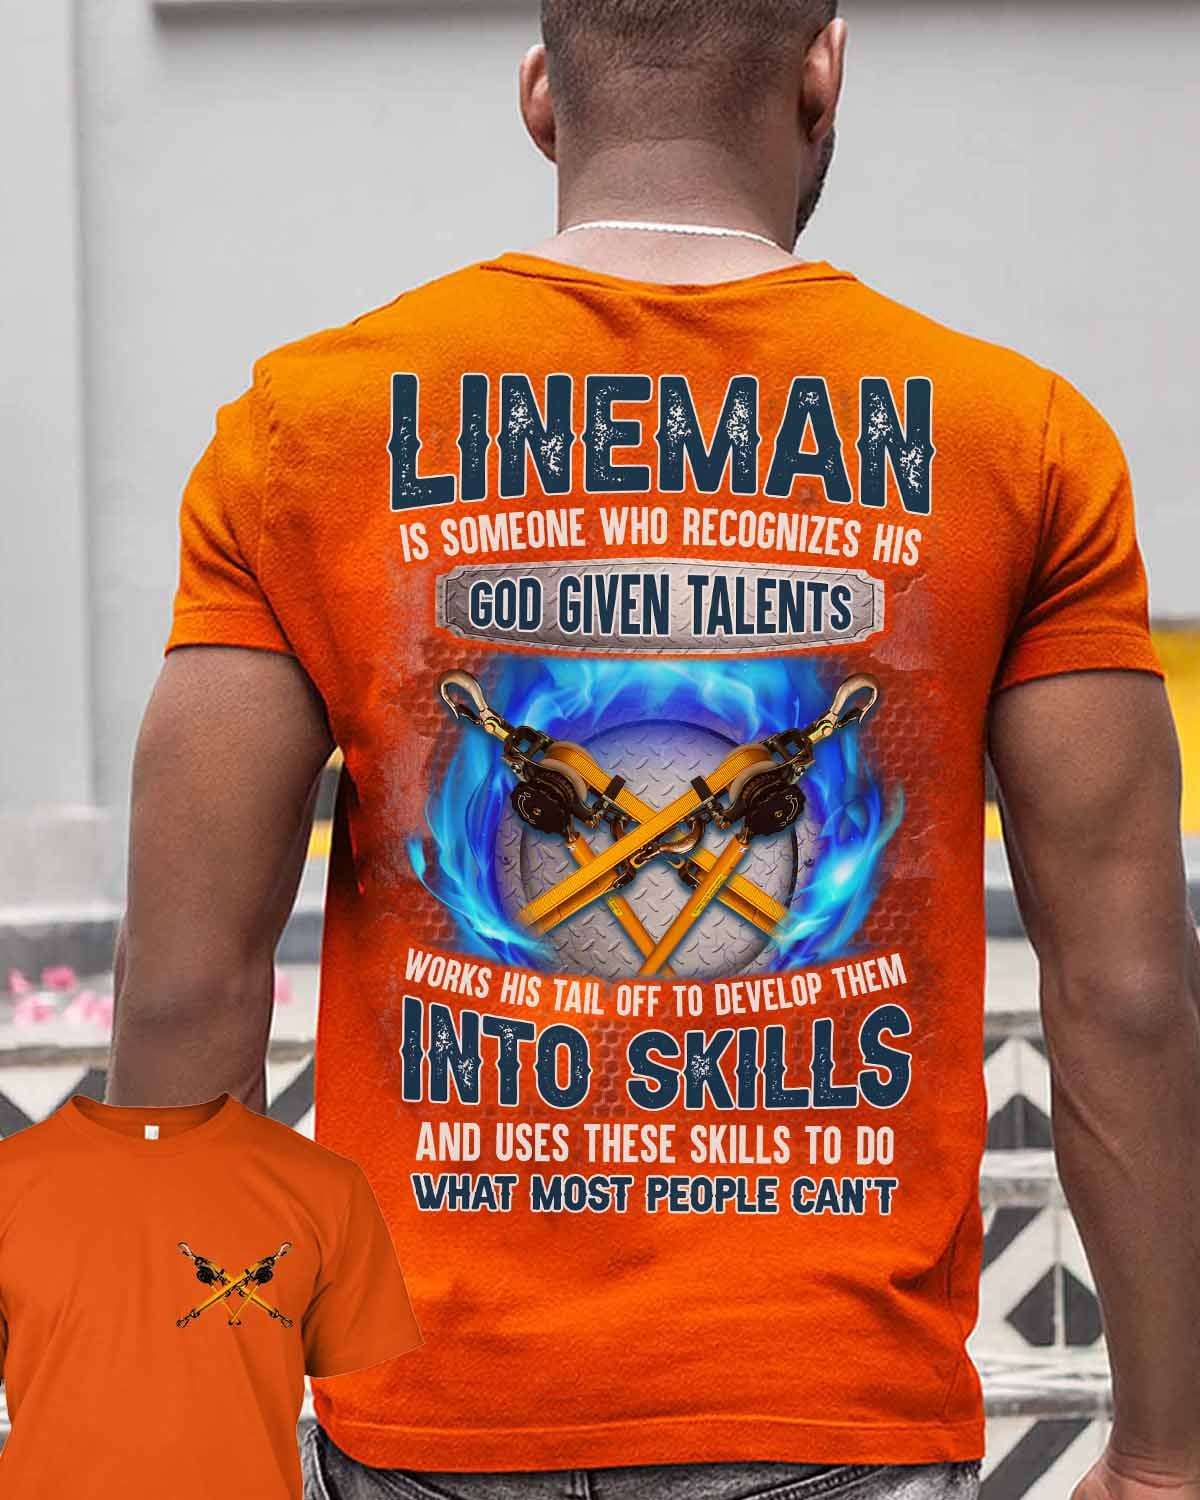 Lineman is someone who recognizes his god given talents - Works his tail off to develop them into skills